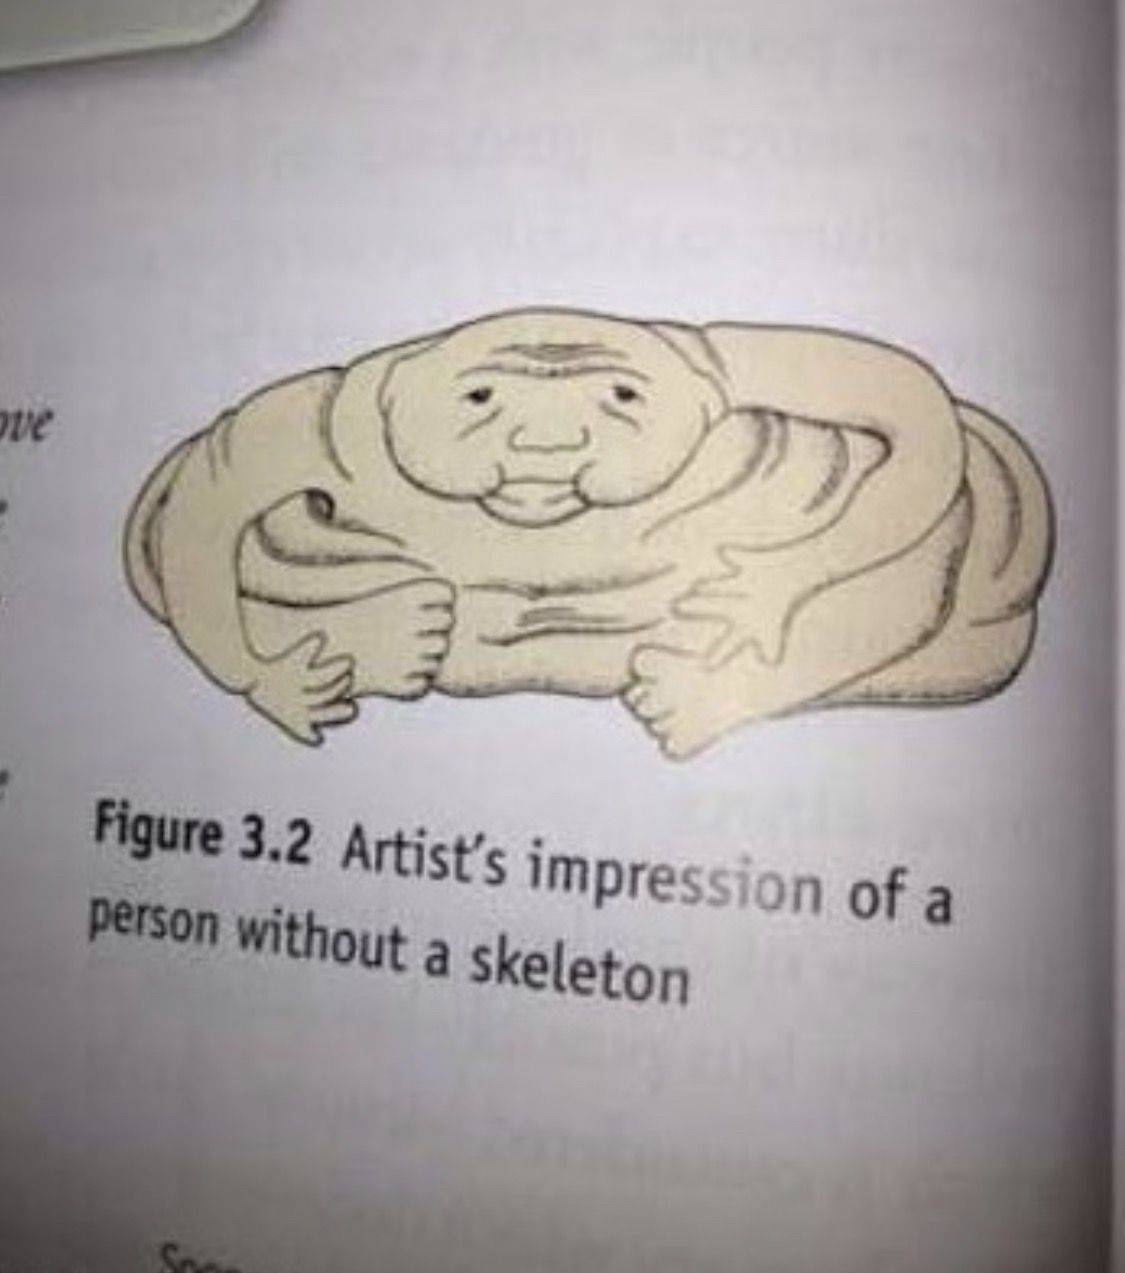 Why does this textbook illustration make me laugh so hard